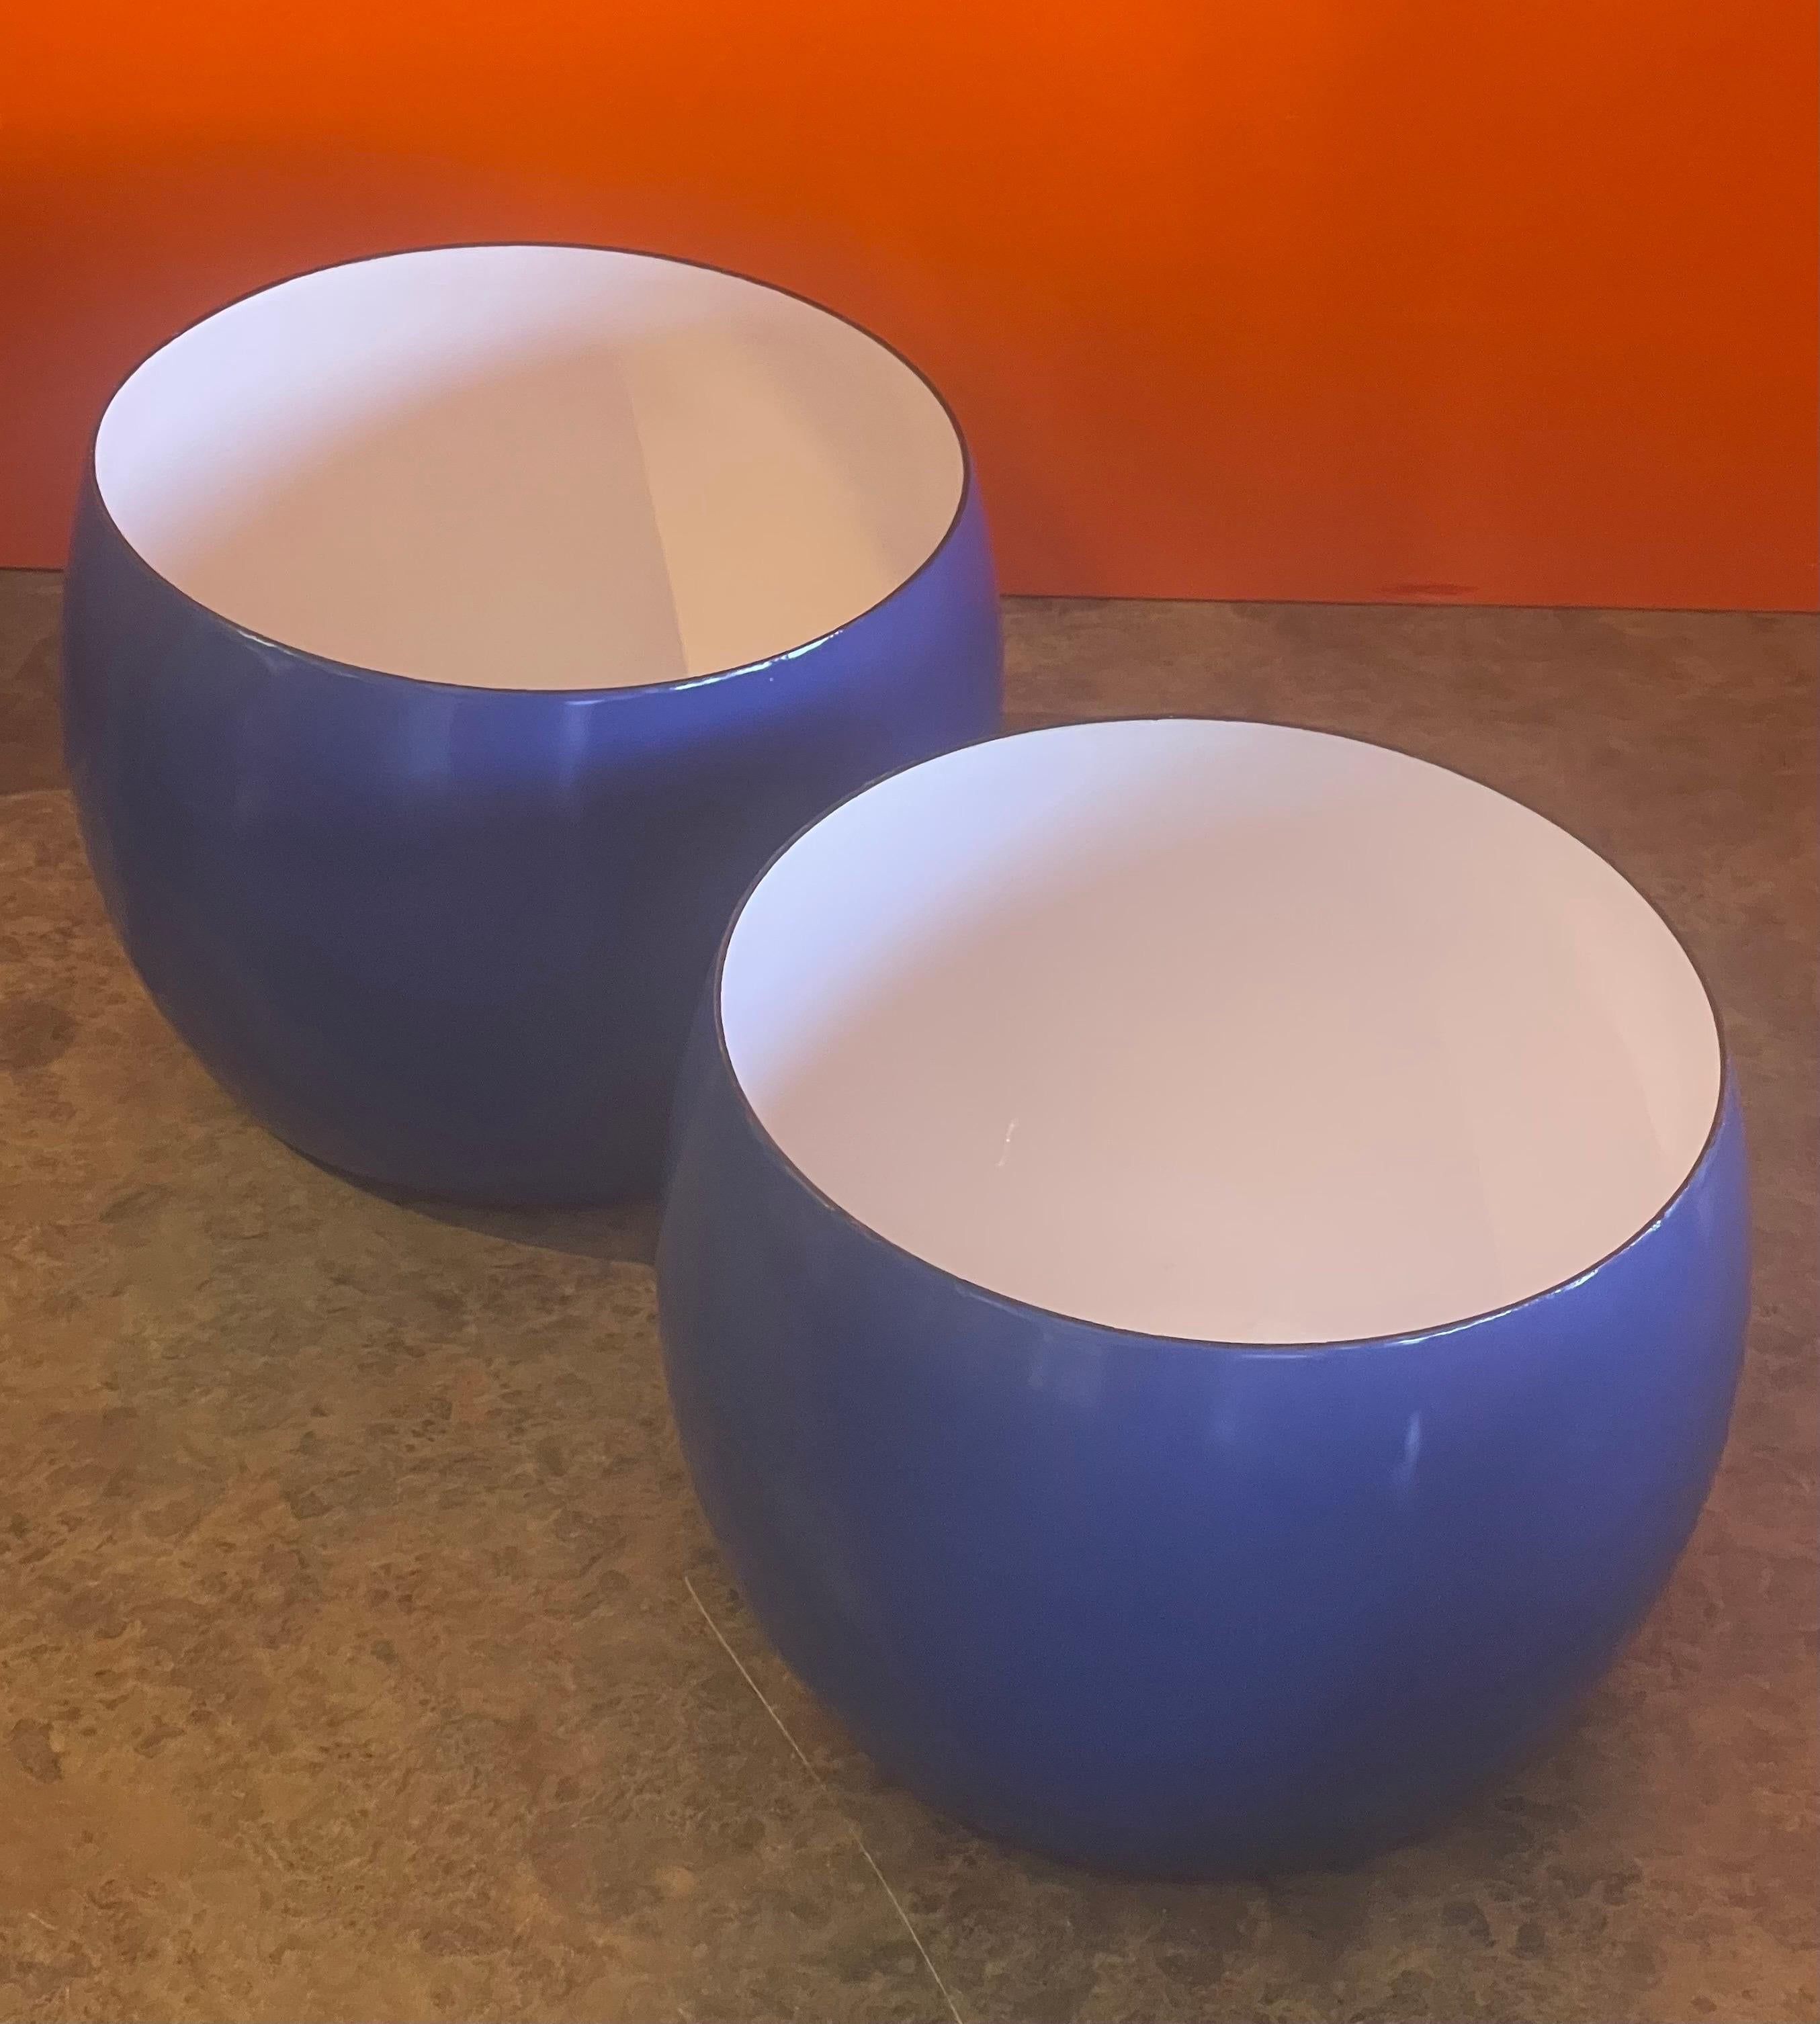 A very nice pair of Danish modern blue & white enamel bowls by Jens Quistgaard for Dansk, circa 1960s. The bowls are in very good vintage condition with no chips to the enamel and measure 8.25